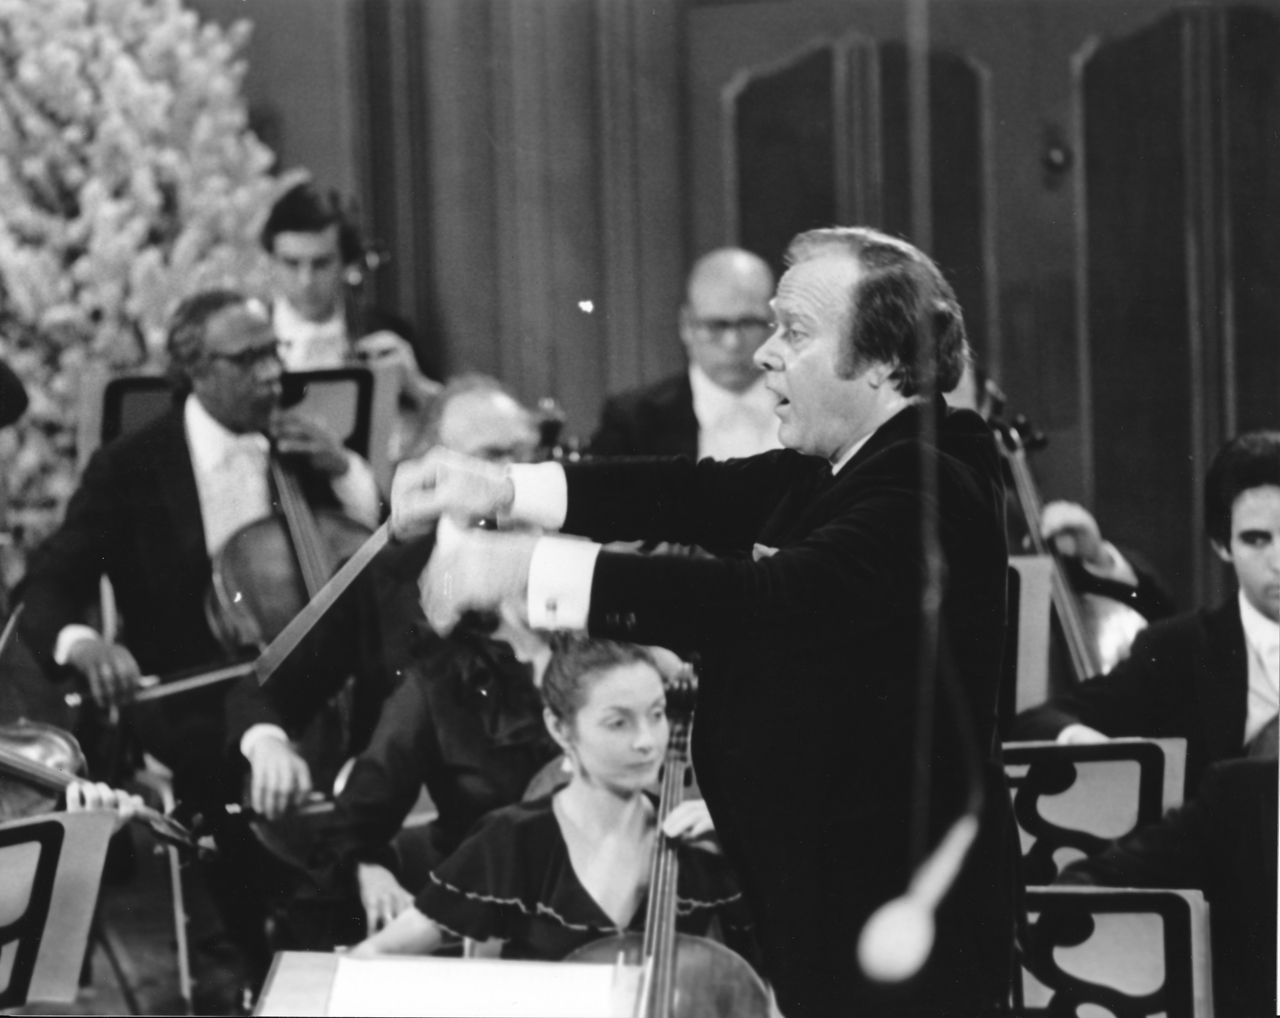 Page leads musicians on the decorated Severance stage for a 1979 Holiday Concert